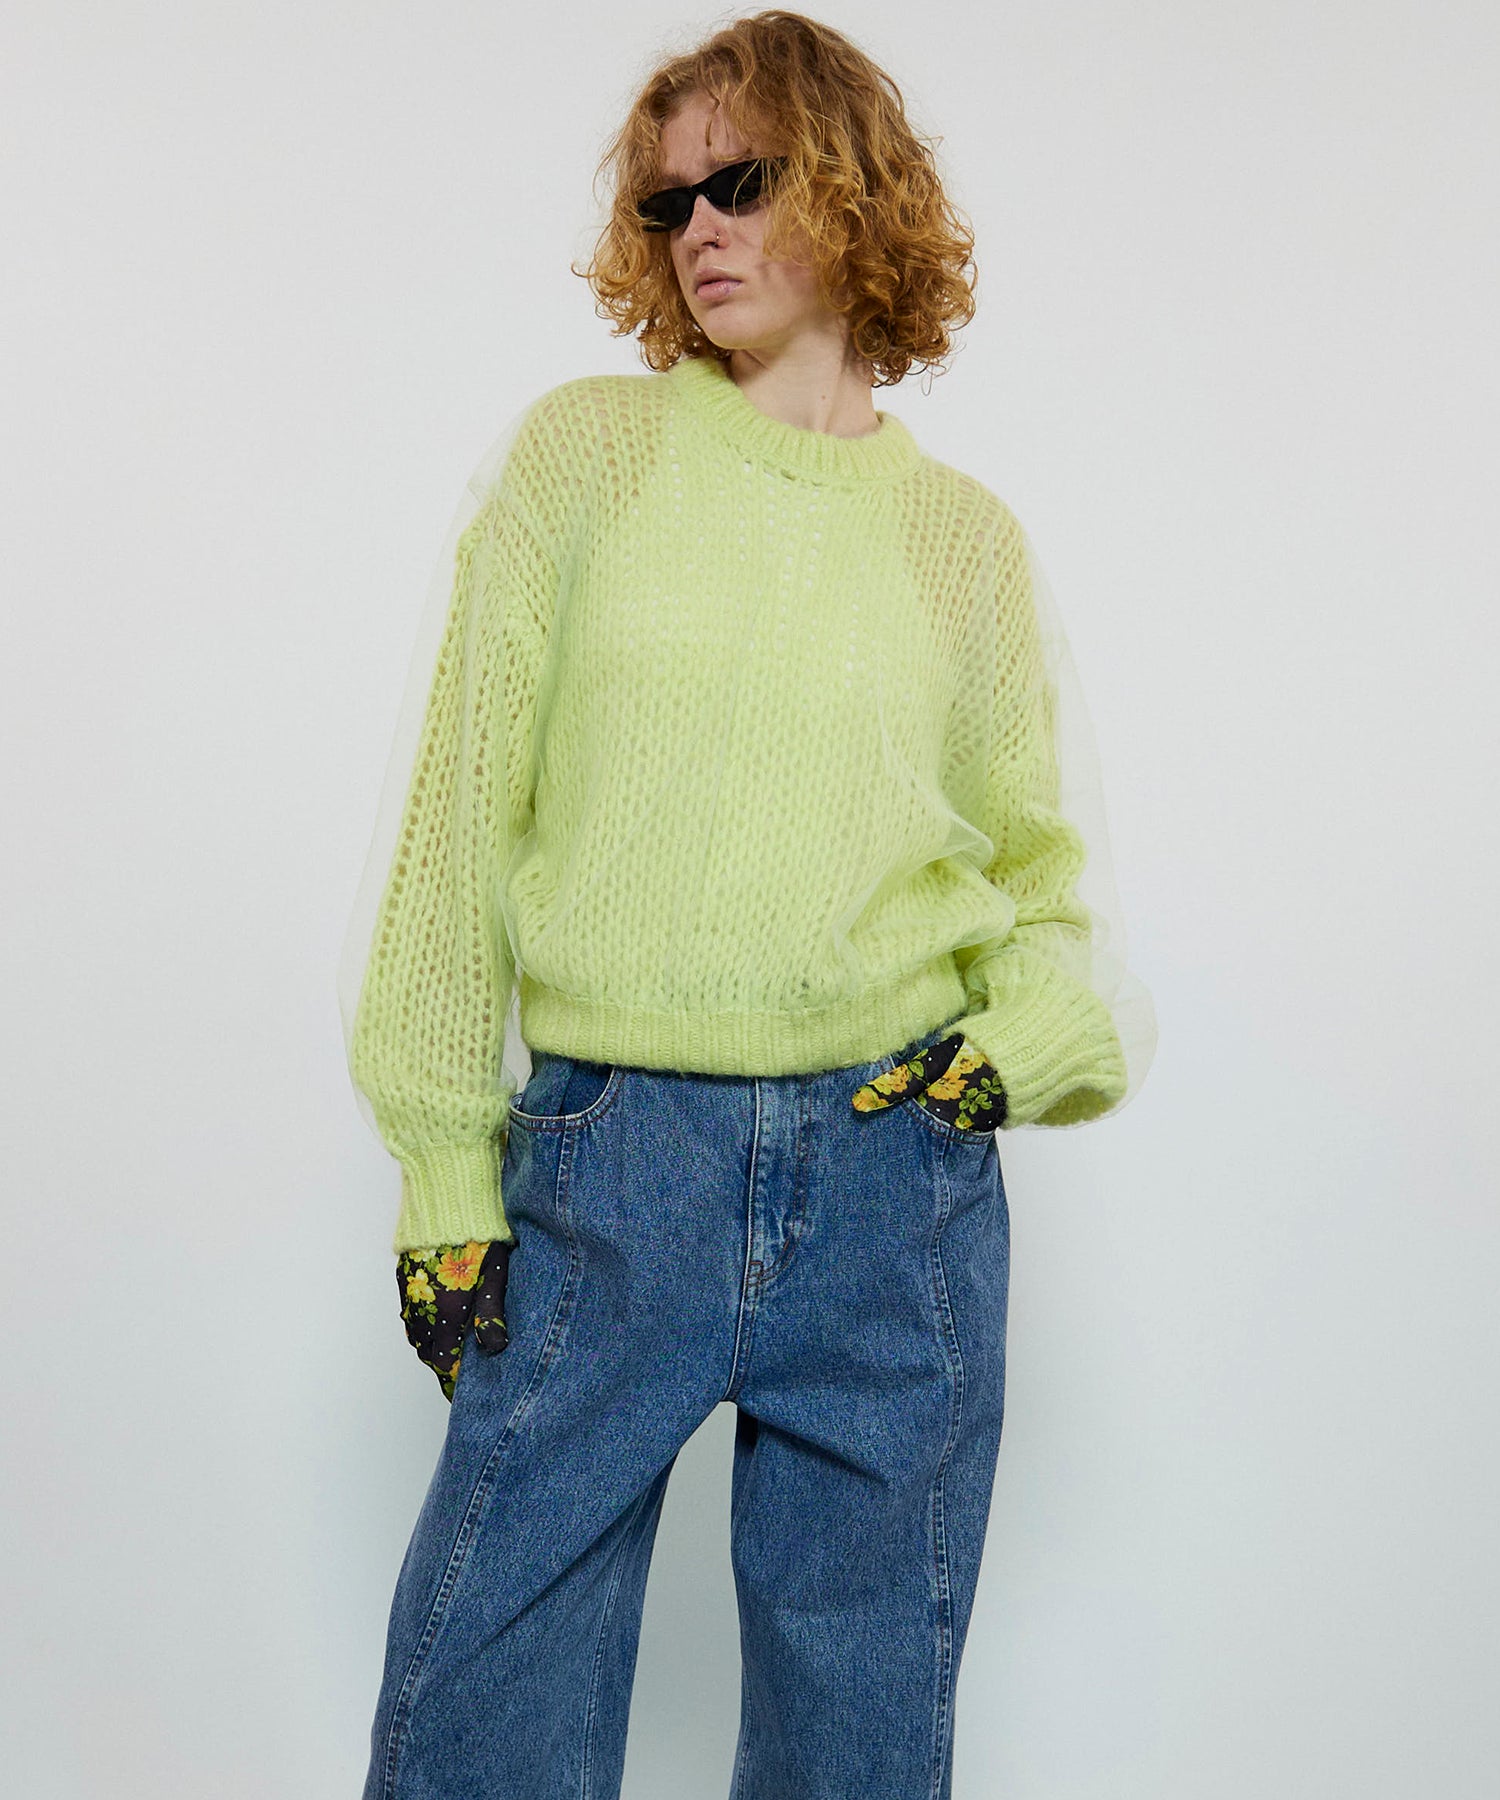 【24AUTUMN PRE-ORDER】Tulle Layered Low Gauge Reversible Knit Pullover